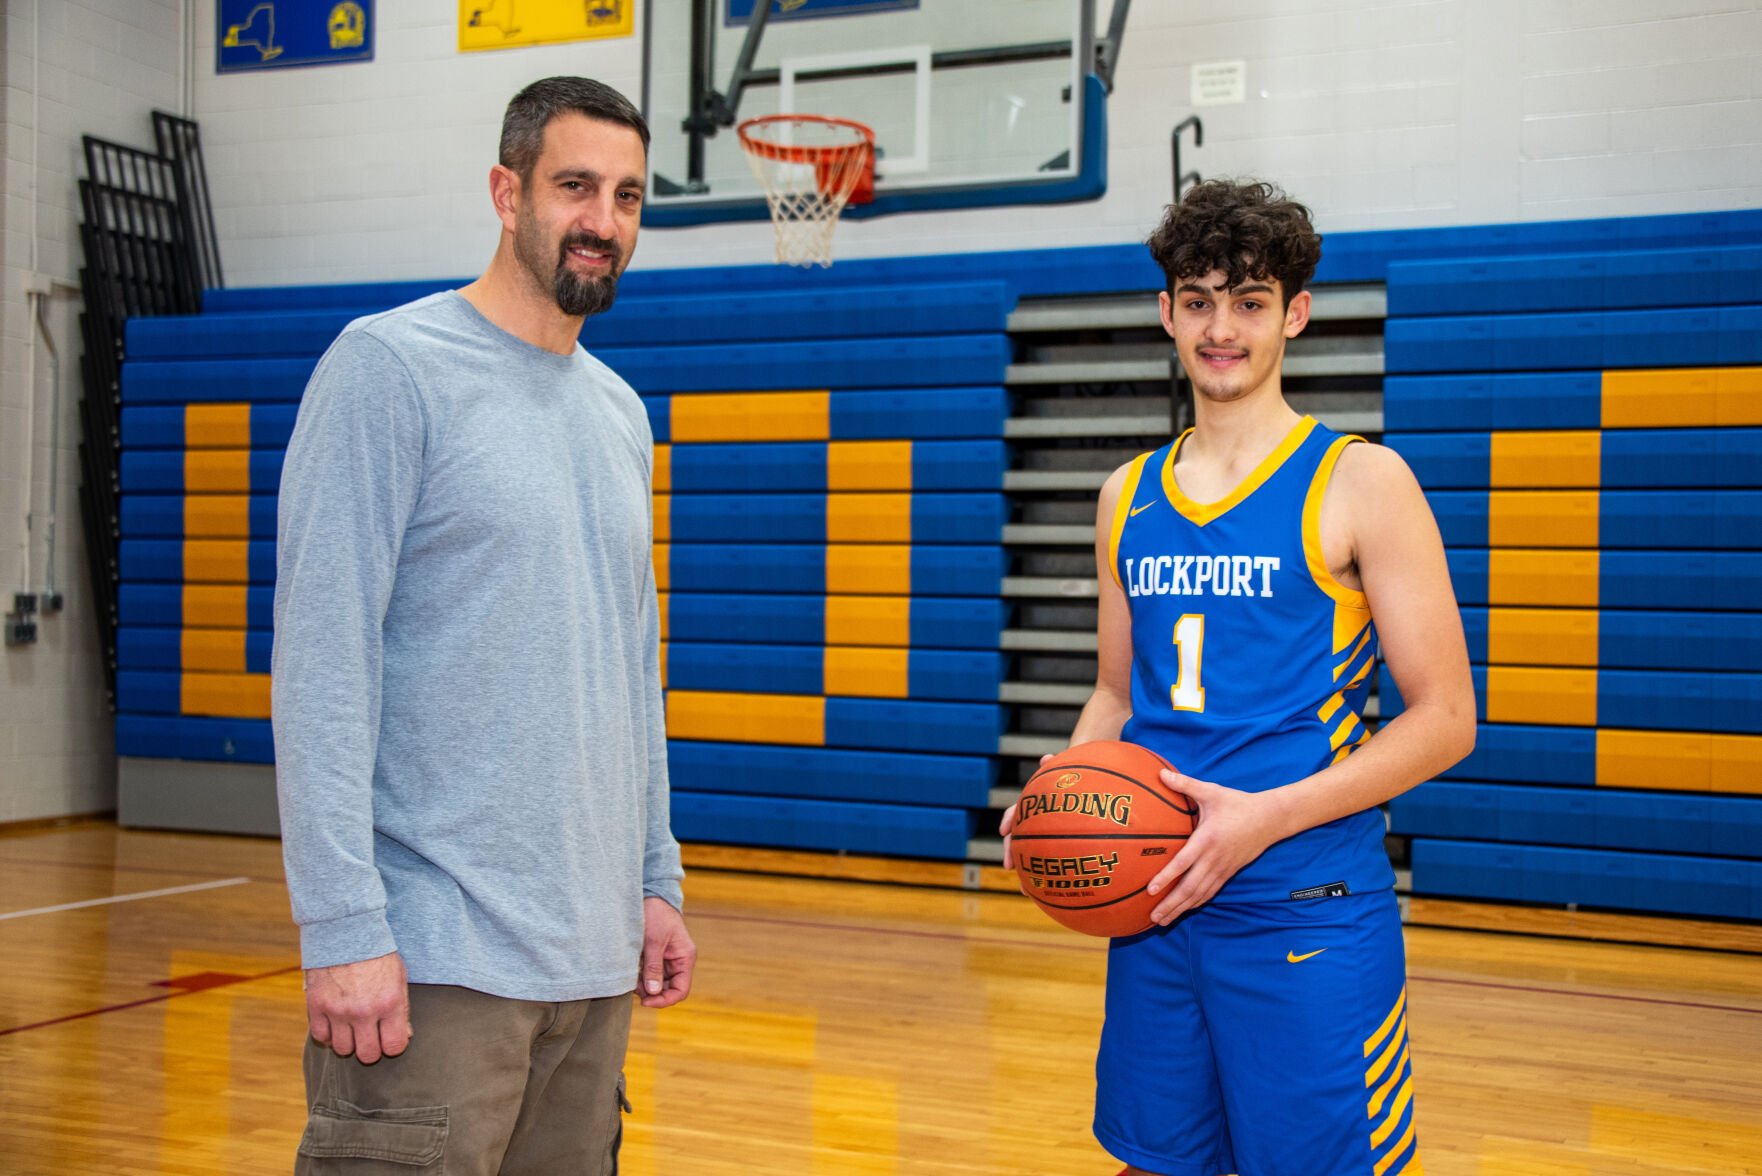 Charlie Croff IV: Following in His Father’s Footsteps as a Star Player for Lockport Lions